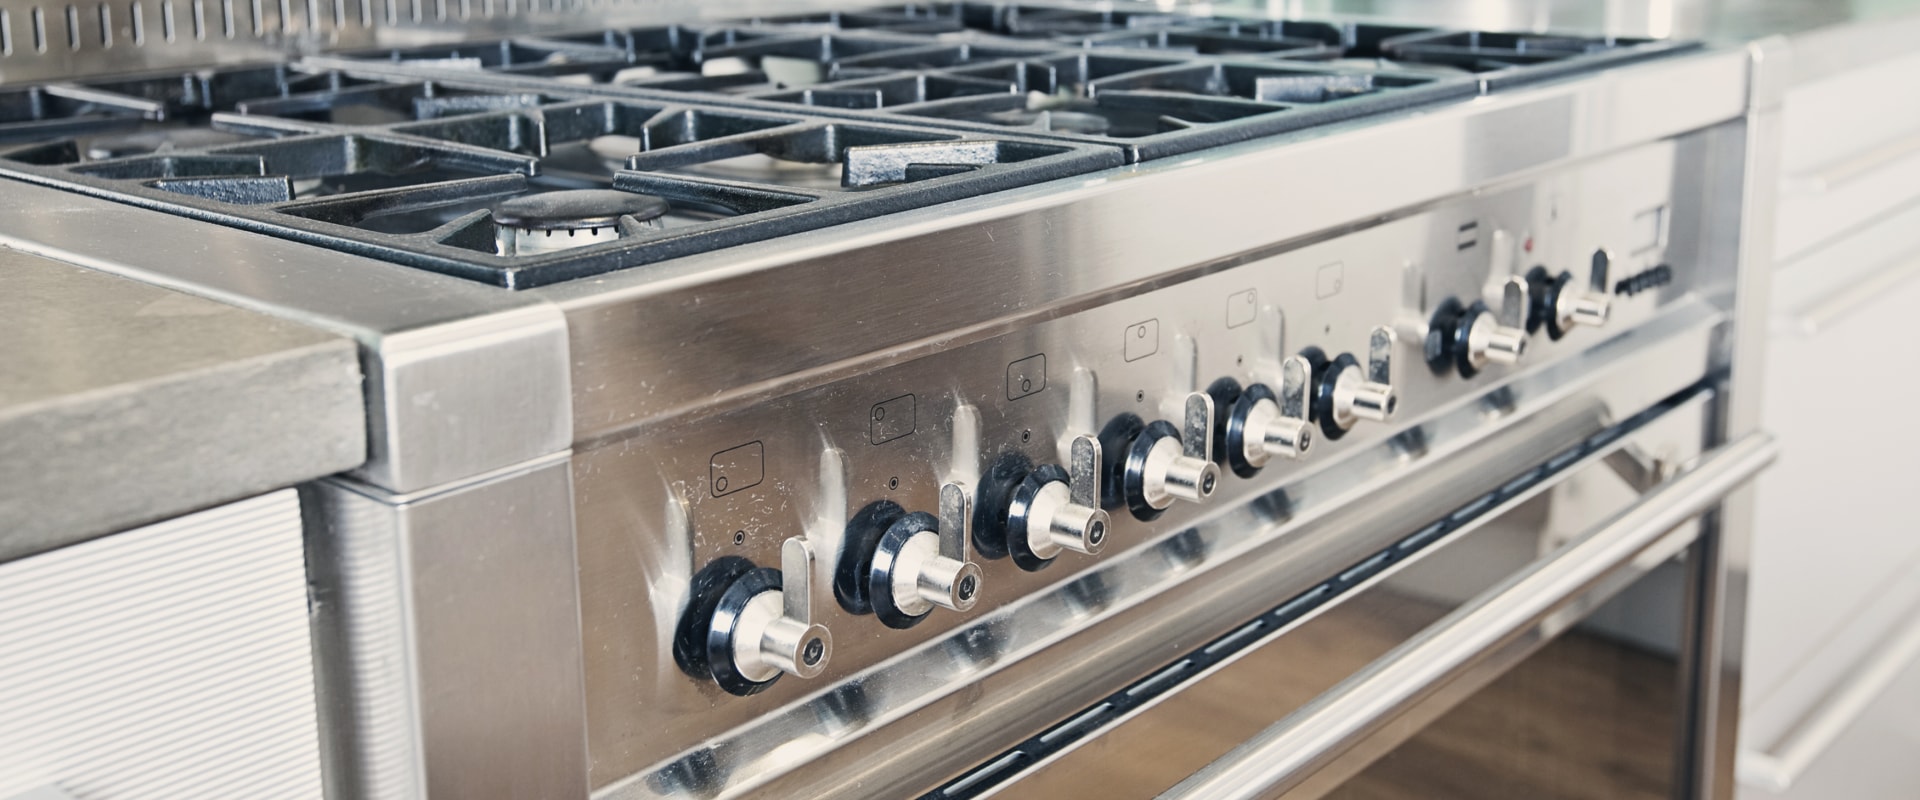 How much do retailers make on appliances?